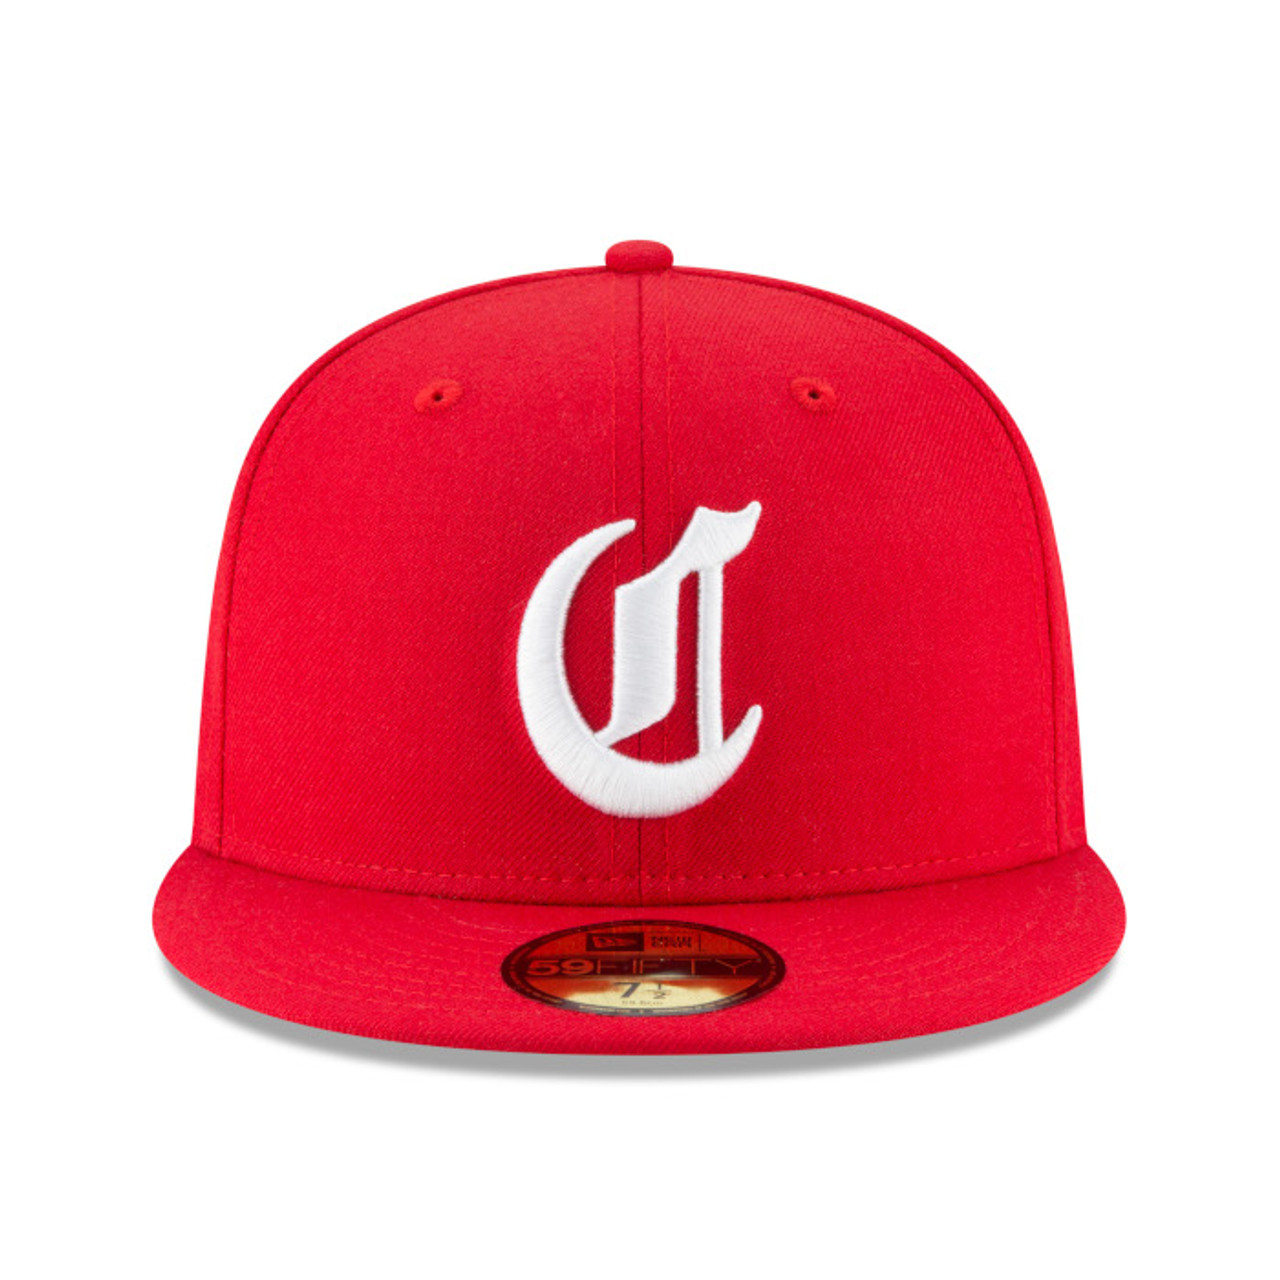 Cincinnati Reds New Era Undervisor 59FIFTY Fitted Hat - White/Red